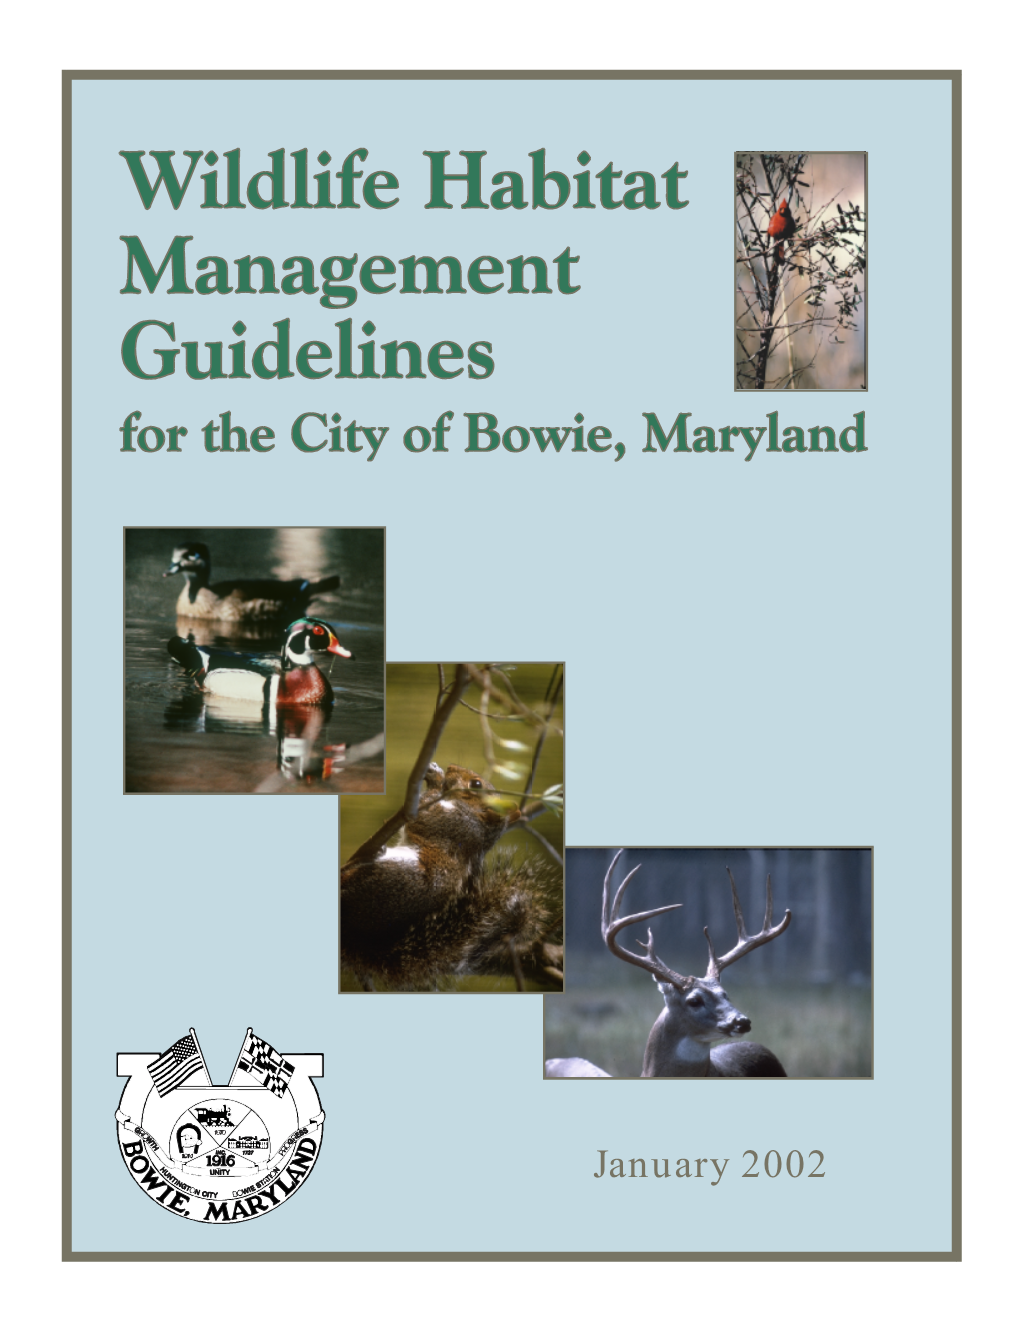 Wildlife Habitat Management Guidelines for the City of Bowie, Maryland